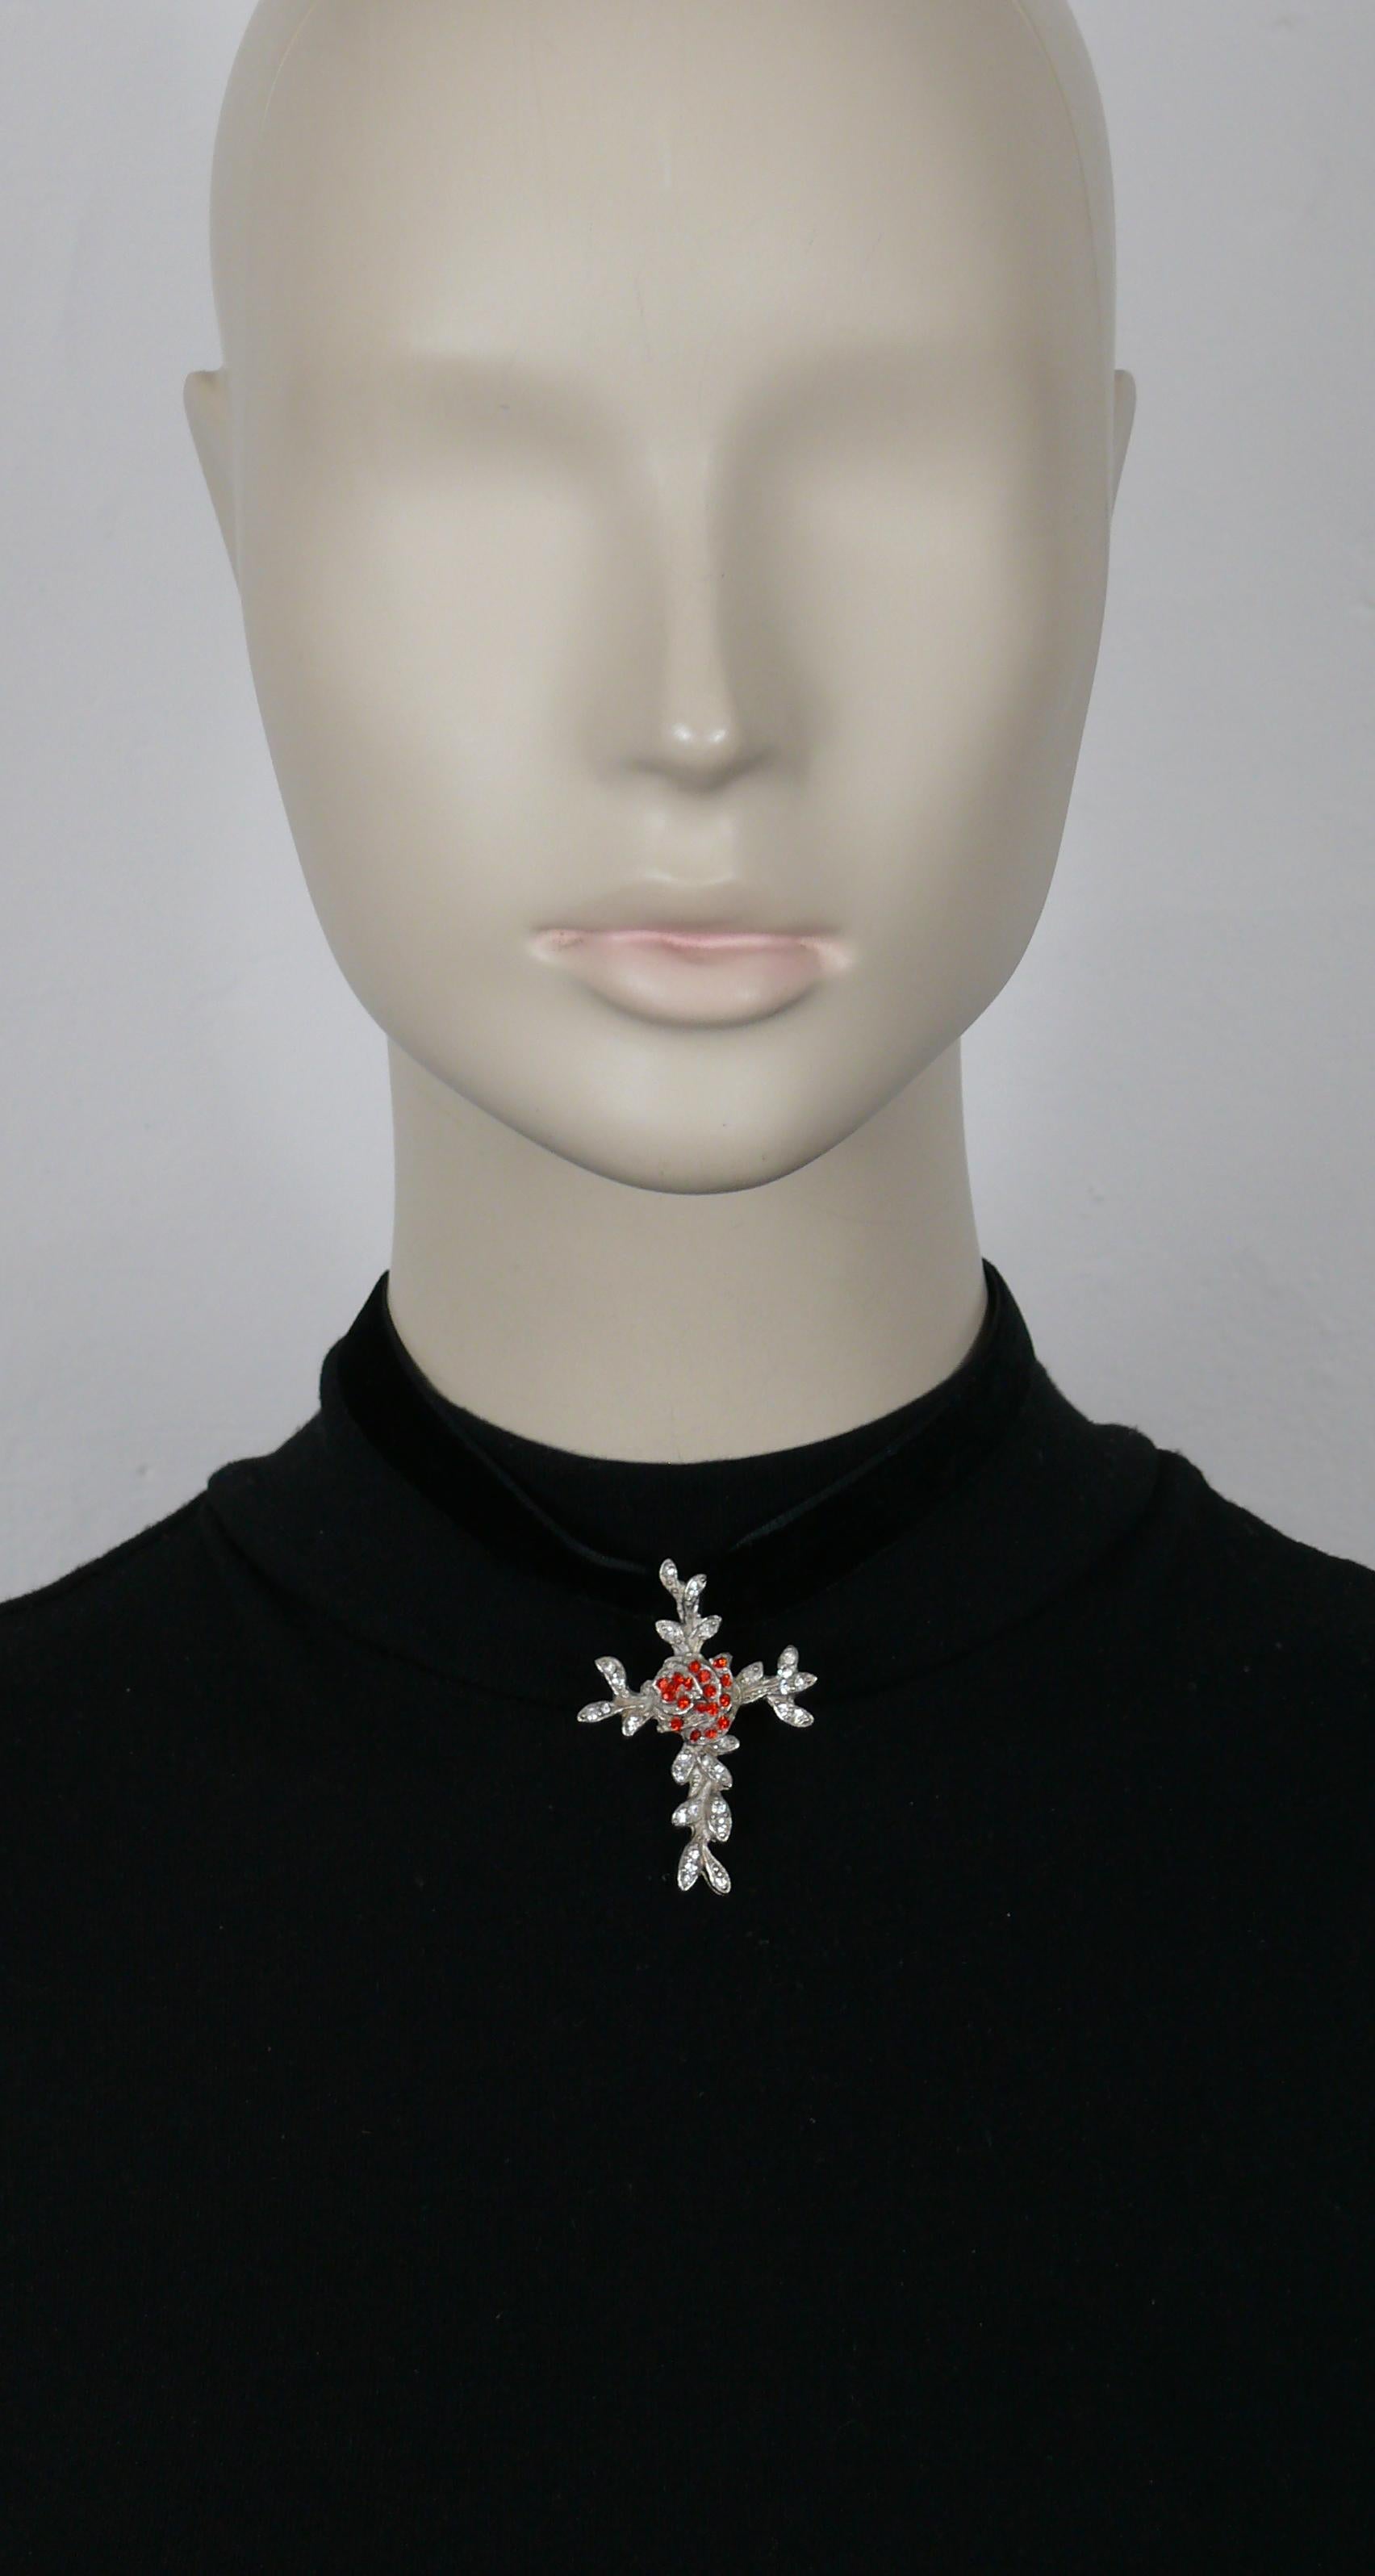 CHRISTIAN LACROIX vintage silver tone cross pendant featuring a floral design of a rose and leaves embellished with multicolor crystals.

Comes with a black velvet ribbon (ties at the neck).

Marked CHRISTIAN LACROIX CL Made in France.

Indicative